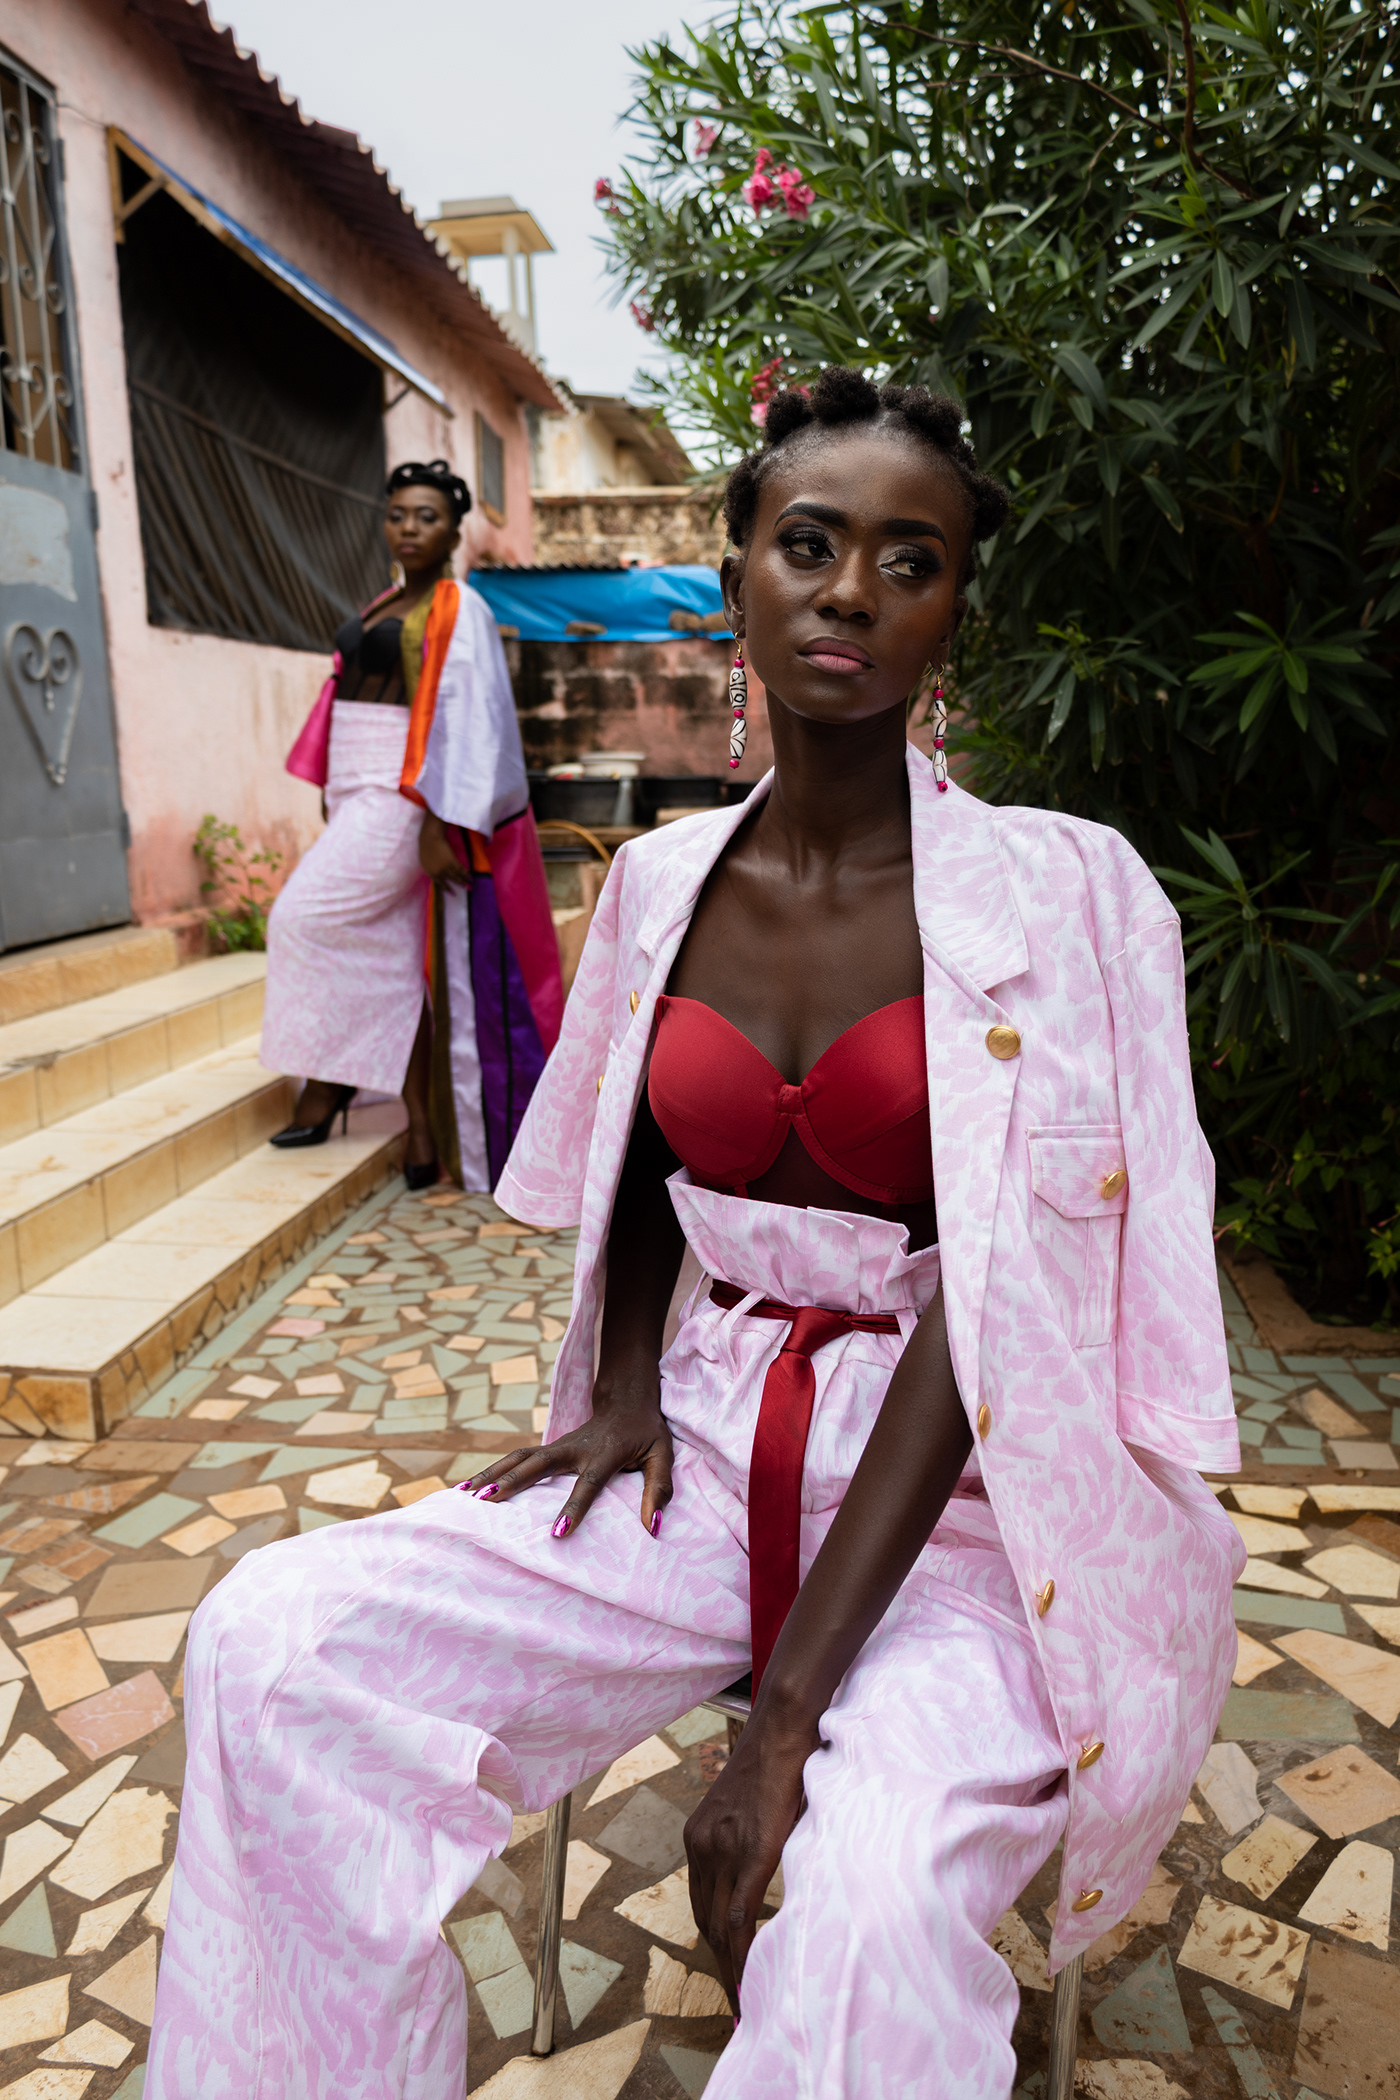 Octobre Rose 2022 - Model from Senegal Bella Penda  - Picture by Khaled Fhemy Mamah - Design carefully crafted by Romzy Studio